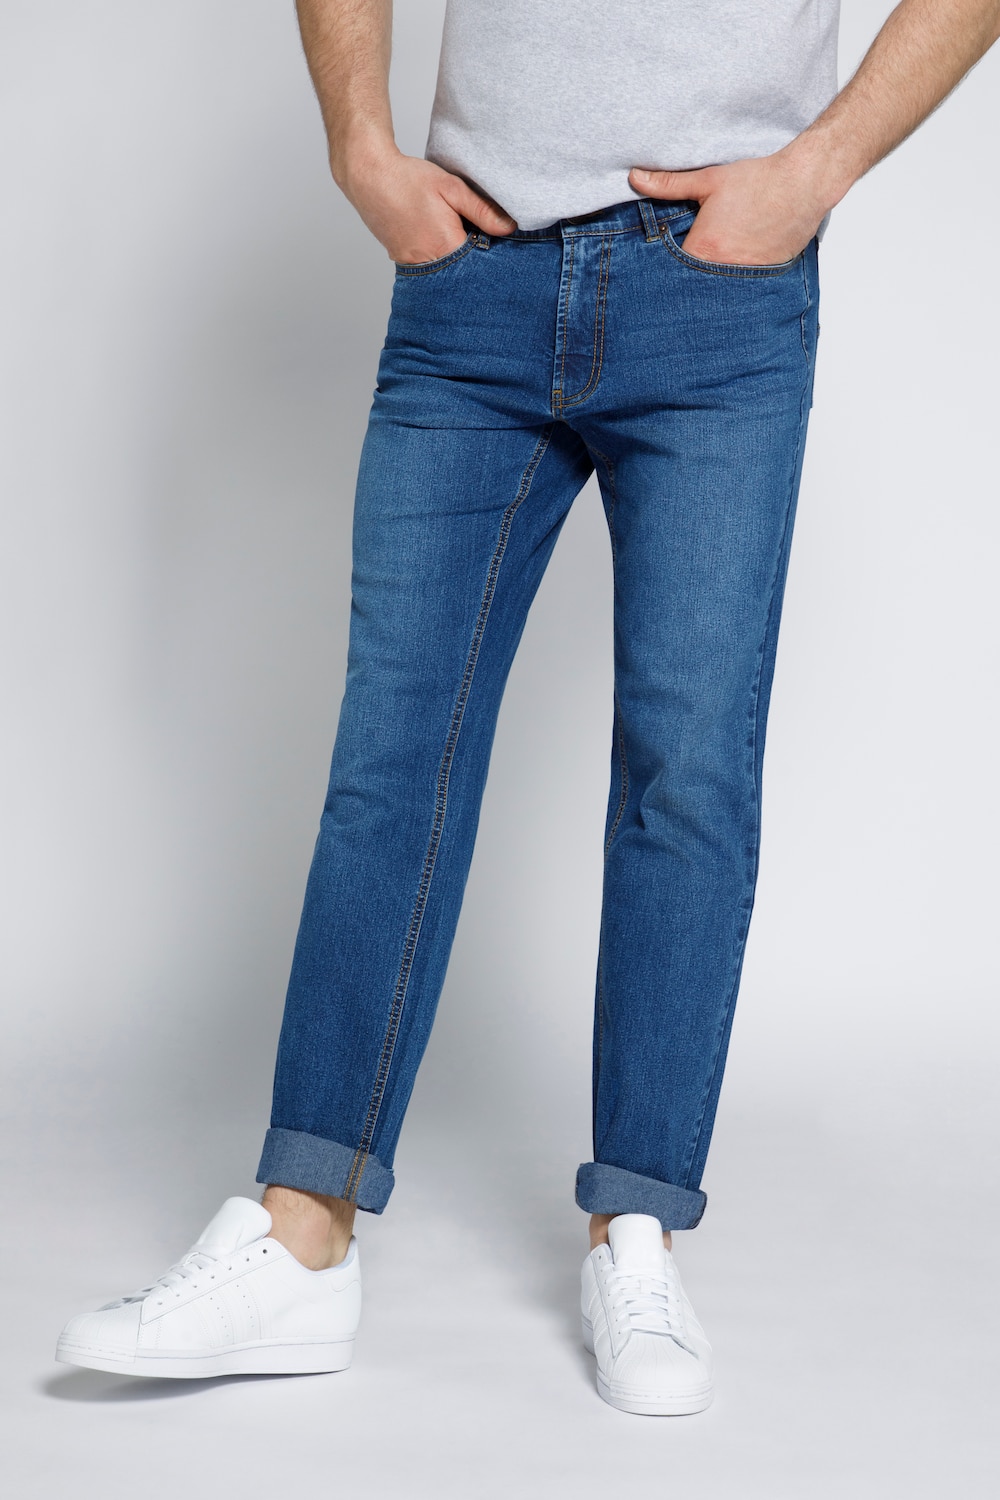 grandes tailles jeans sthuge, femmes, bleu, taille: 36, coton/polyester, sthuge